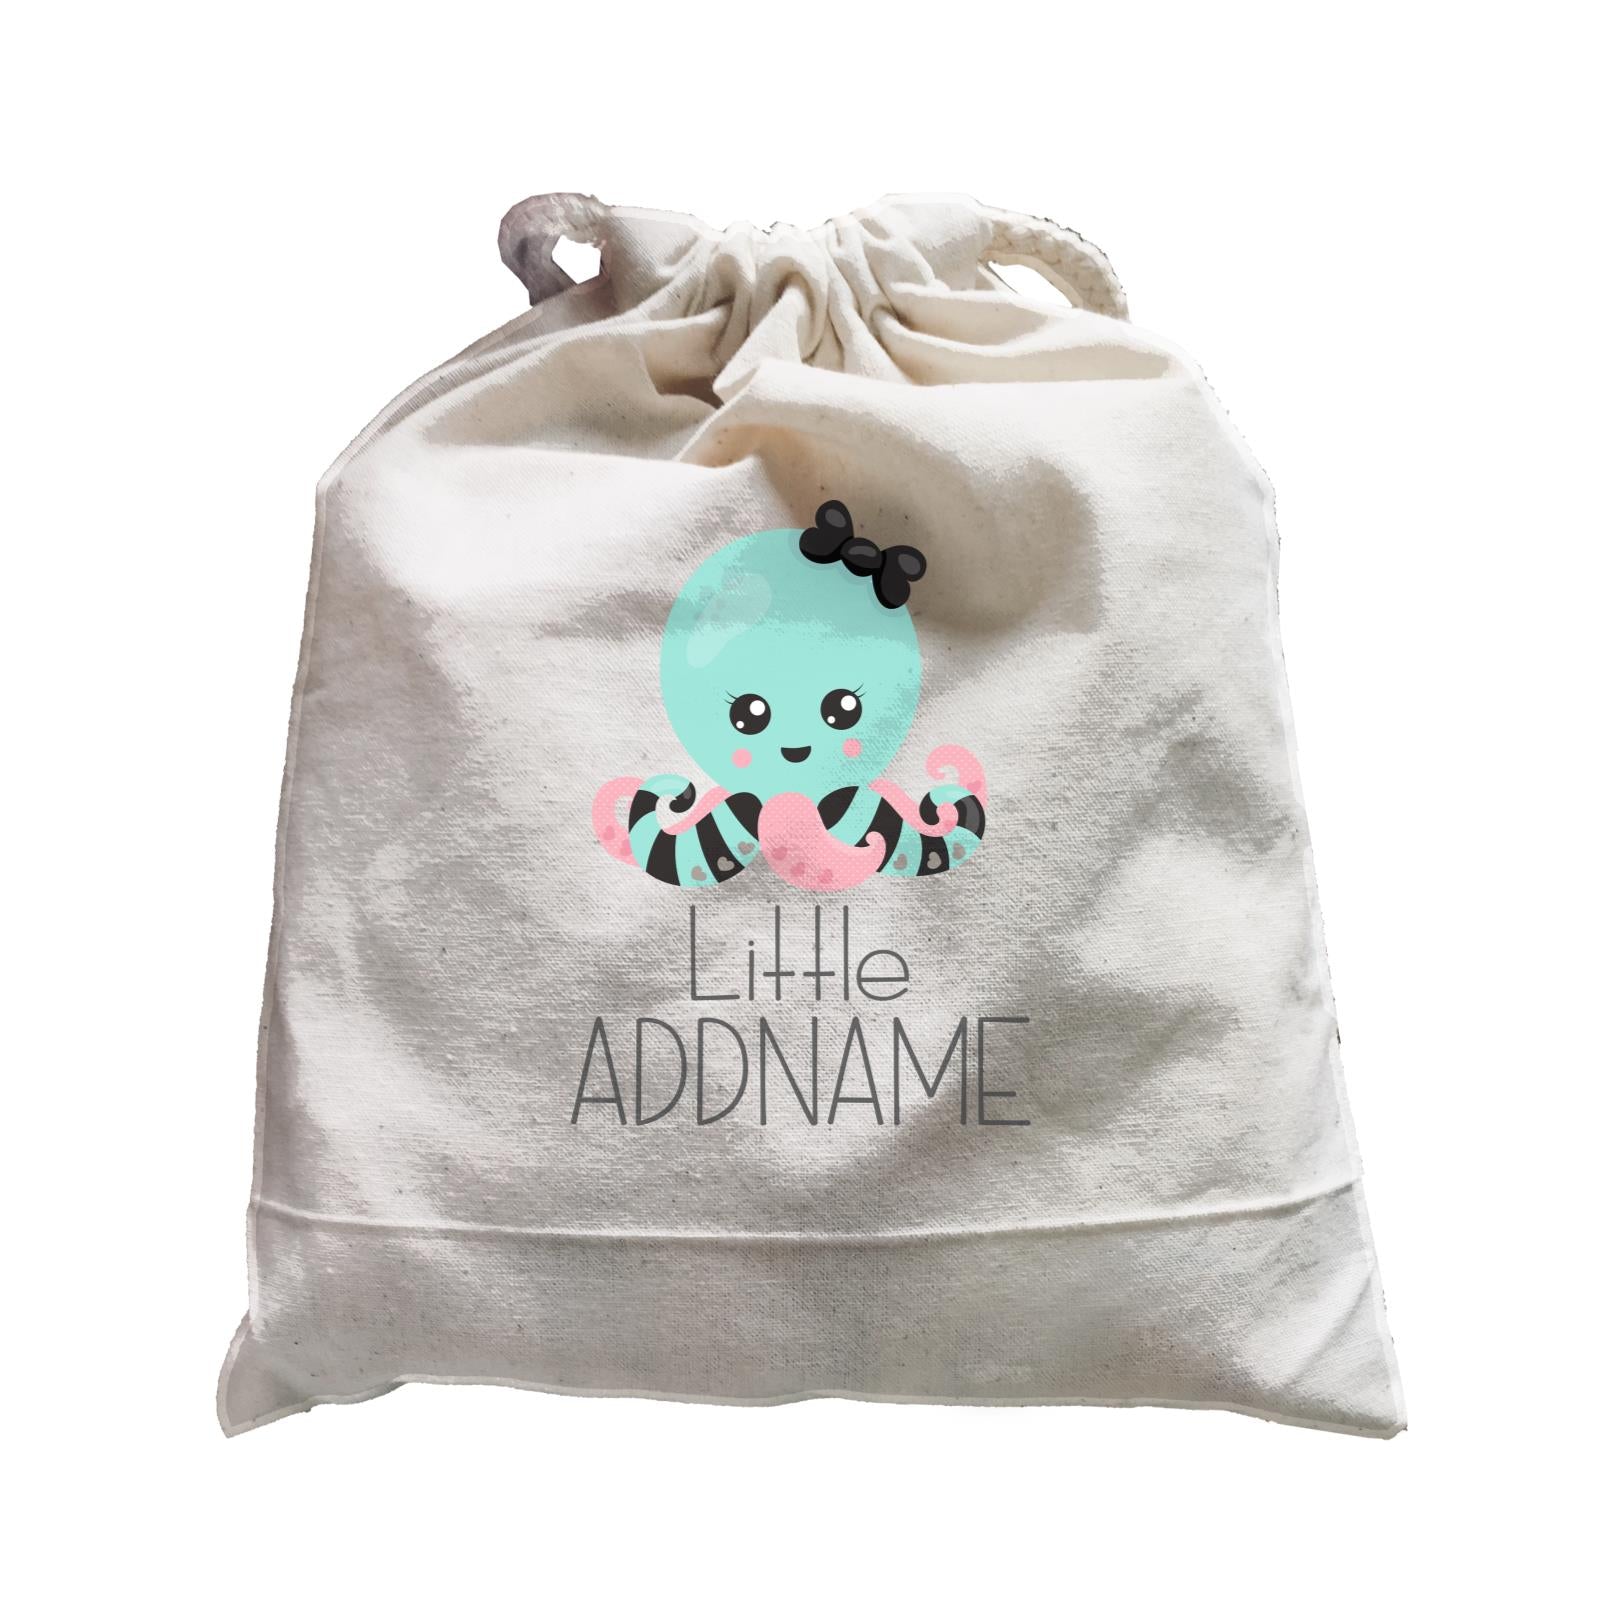 Nursery Animals Little Octopus with Ribbon Addname Satchel